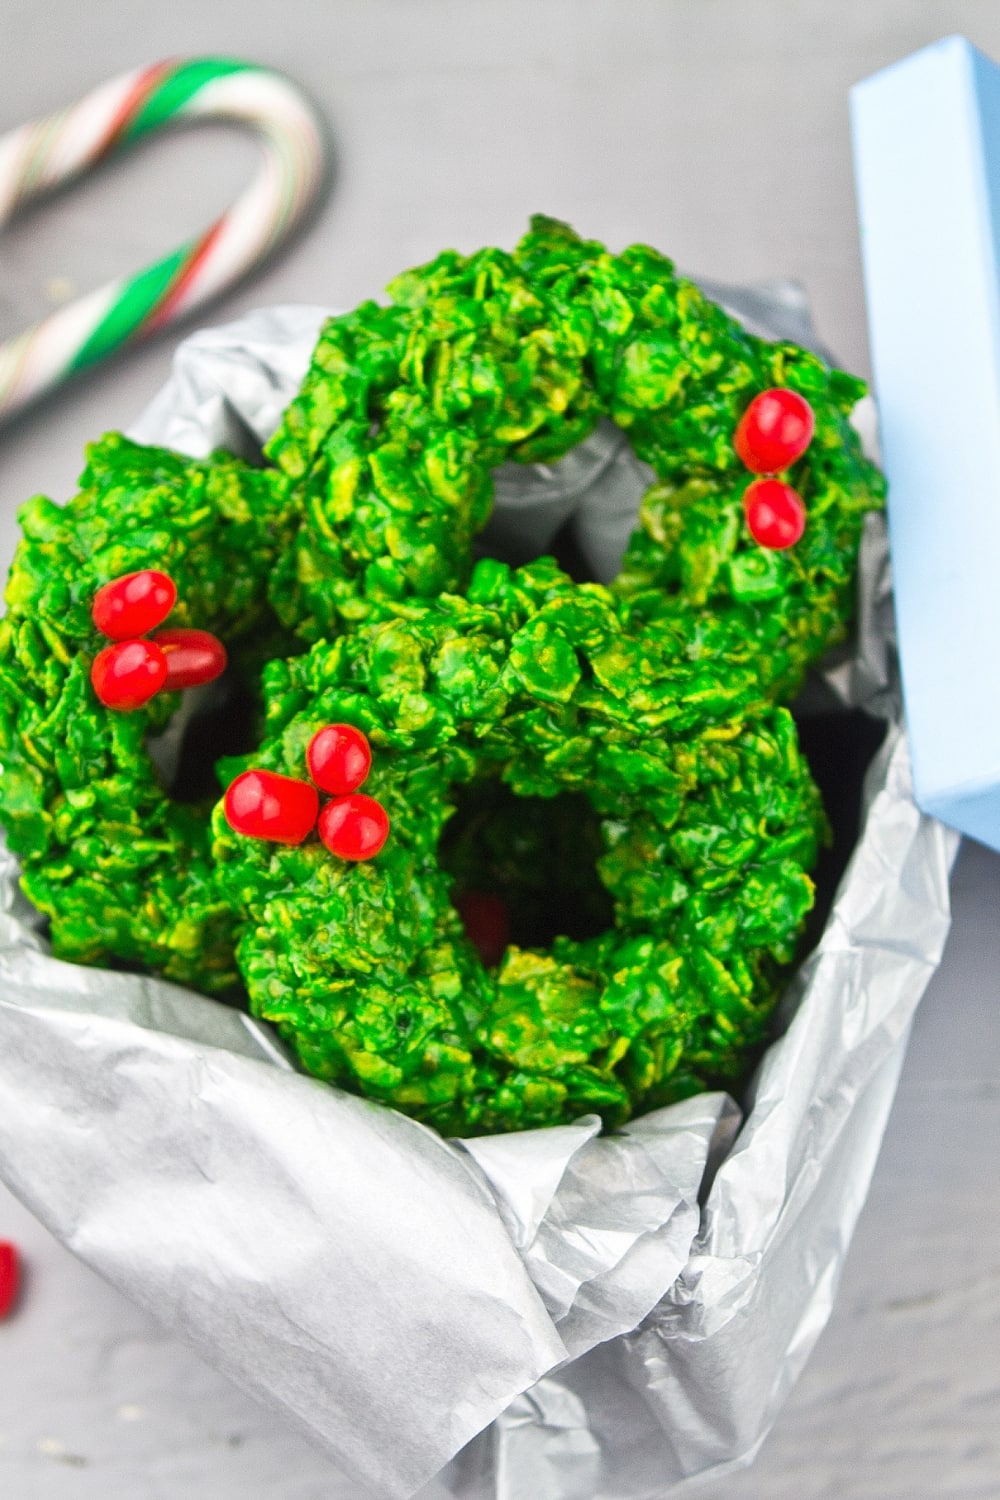 Green Colored Homemade No-Bake Christmas Wreath Cookies Made With Rice Crisps Garnished With Cherries